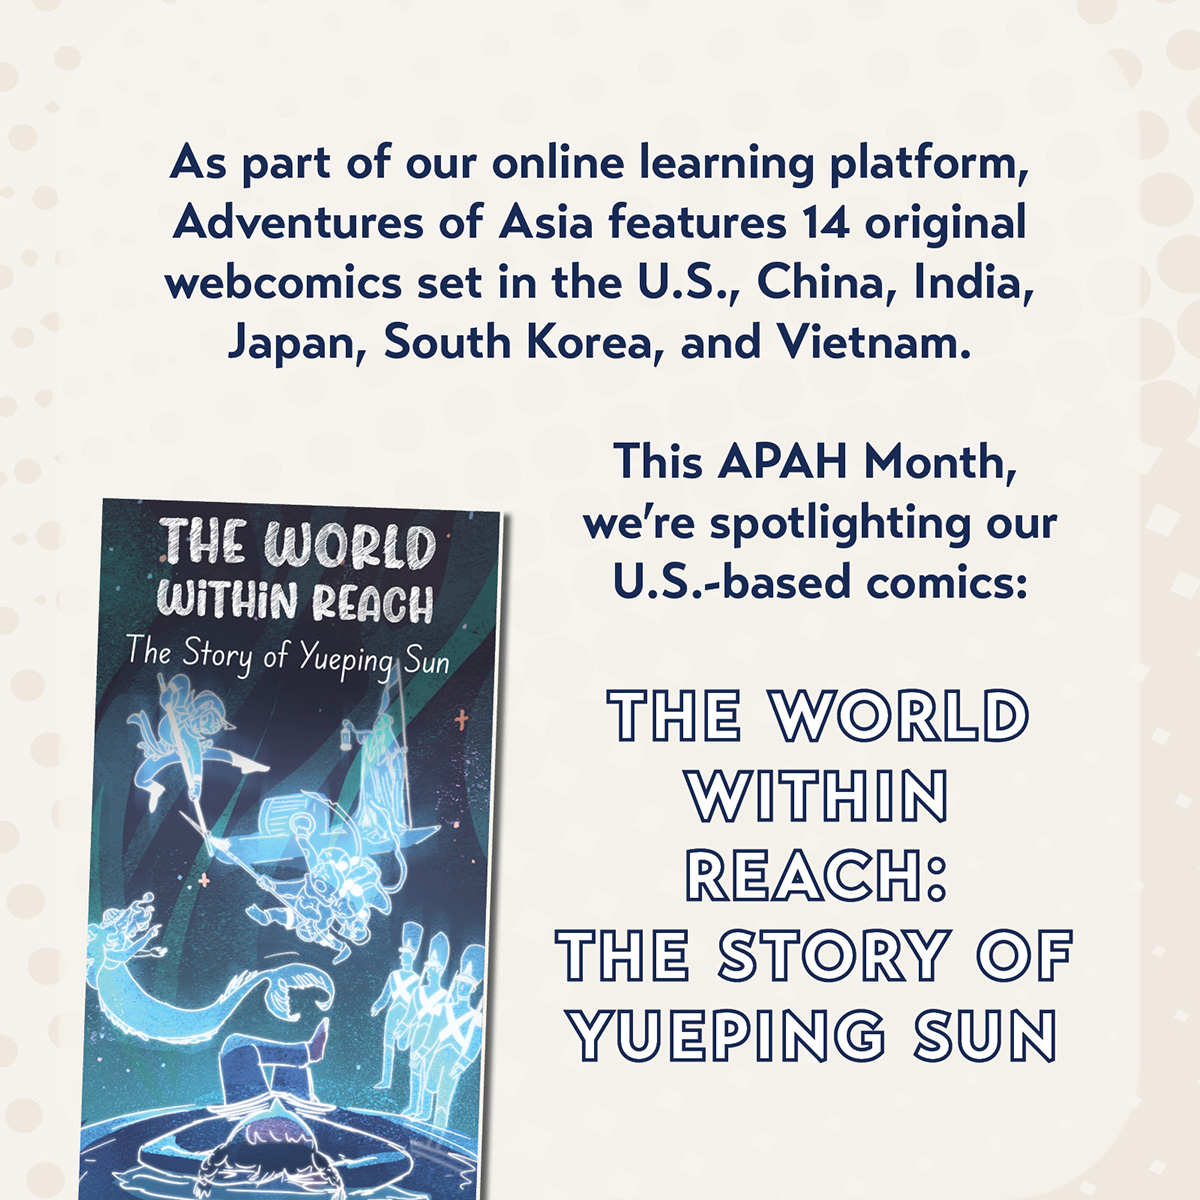 In today's #APAHM2024 spotlight, dive into Y. Ping Sun's story! Through our U.S.-based webcomics in our 'Adventures of Asia' online platform, we're delighted to highlight the stories of Houston leaders including Ping. » asiasociety.org/texas/adventur…